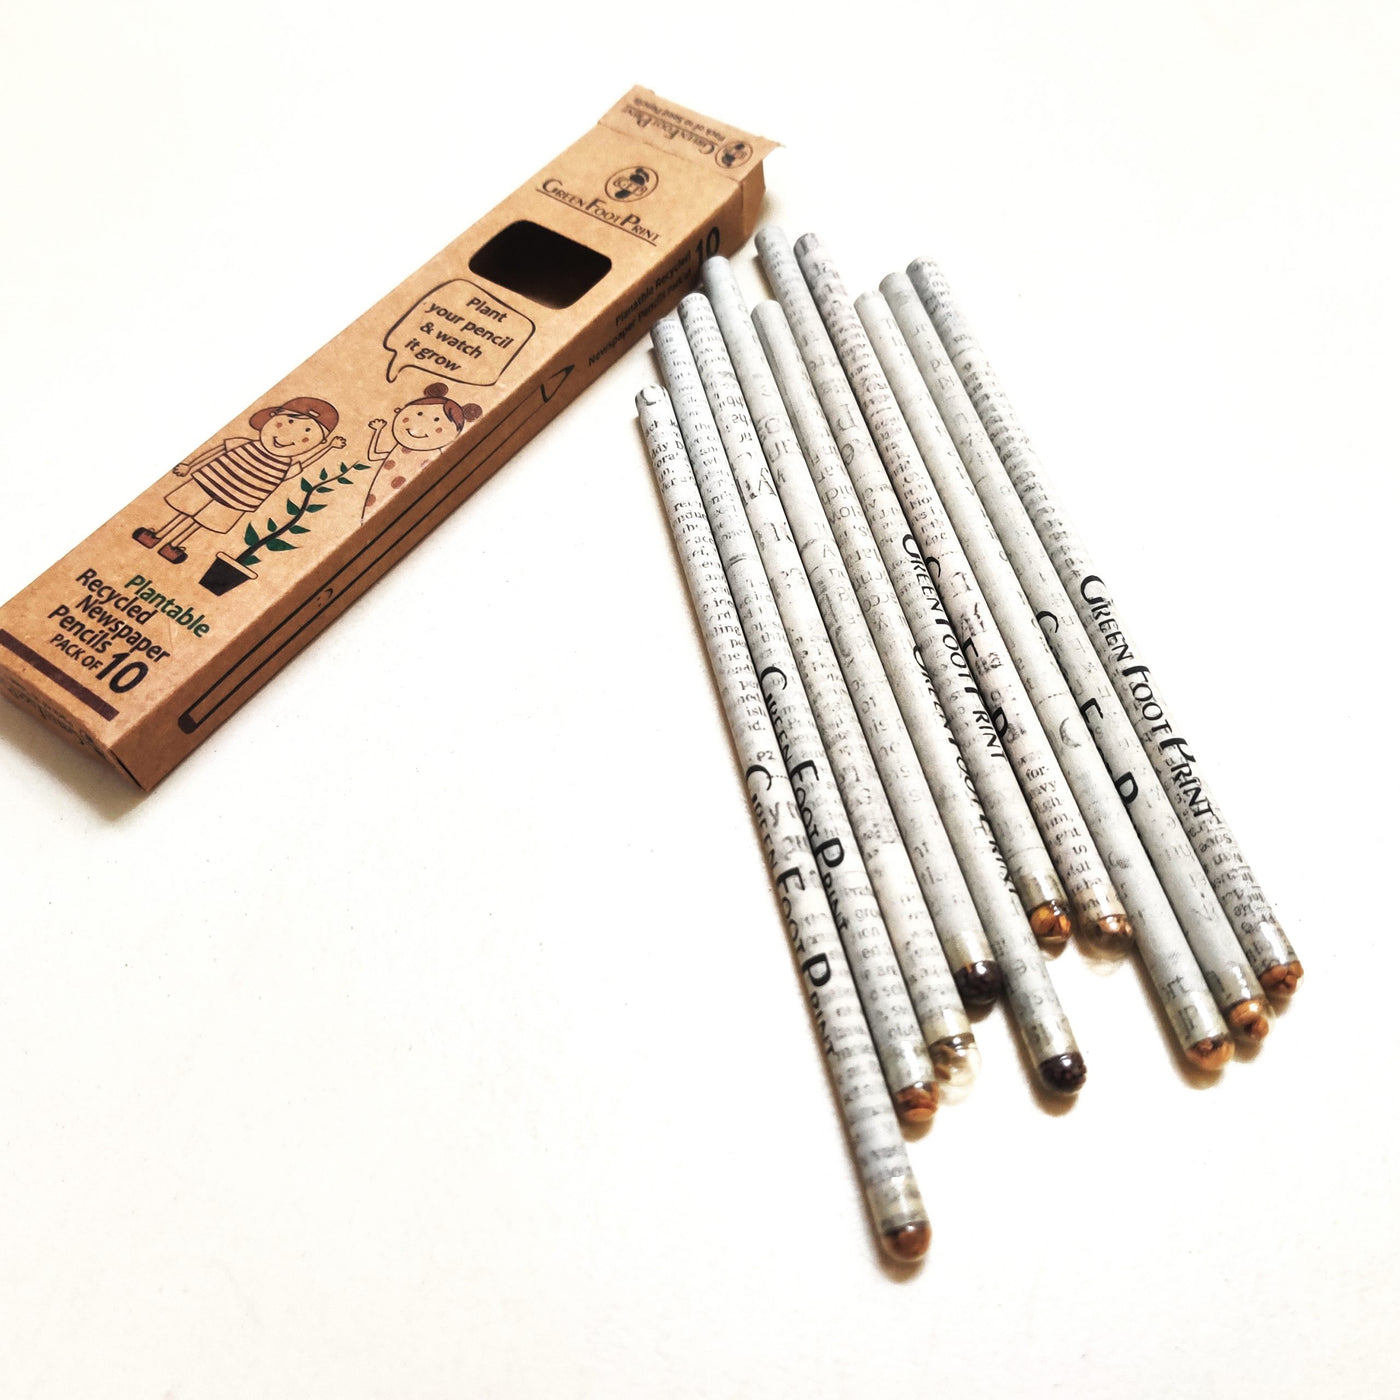 Plantable Recycled News paper Seed Pencils